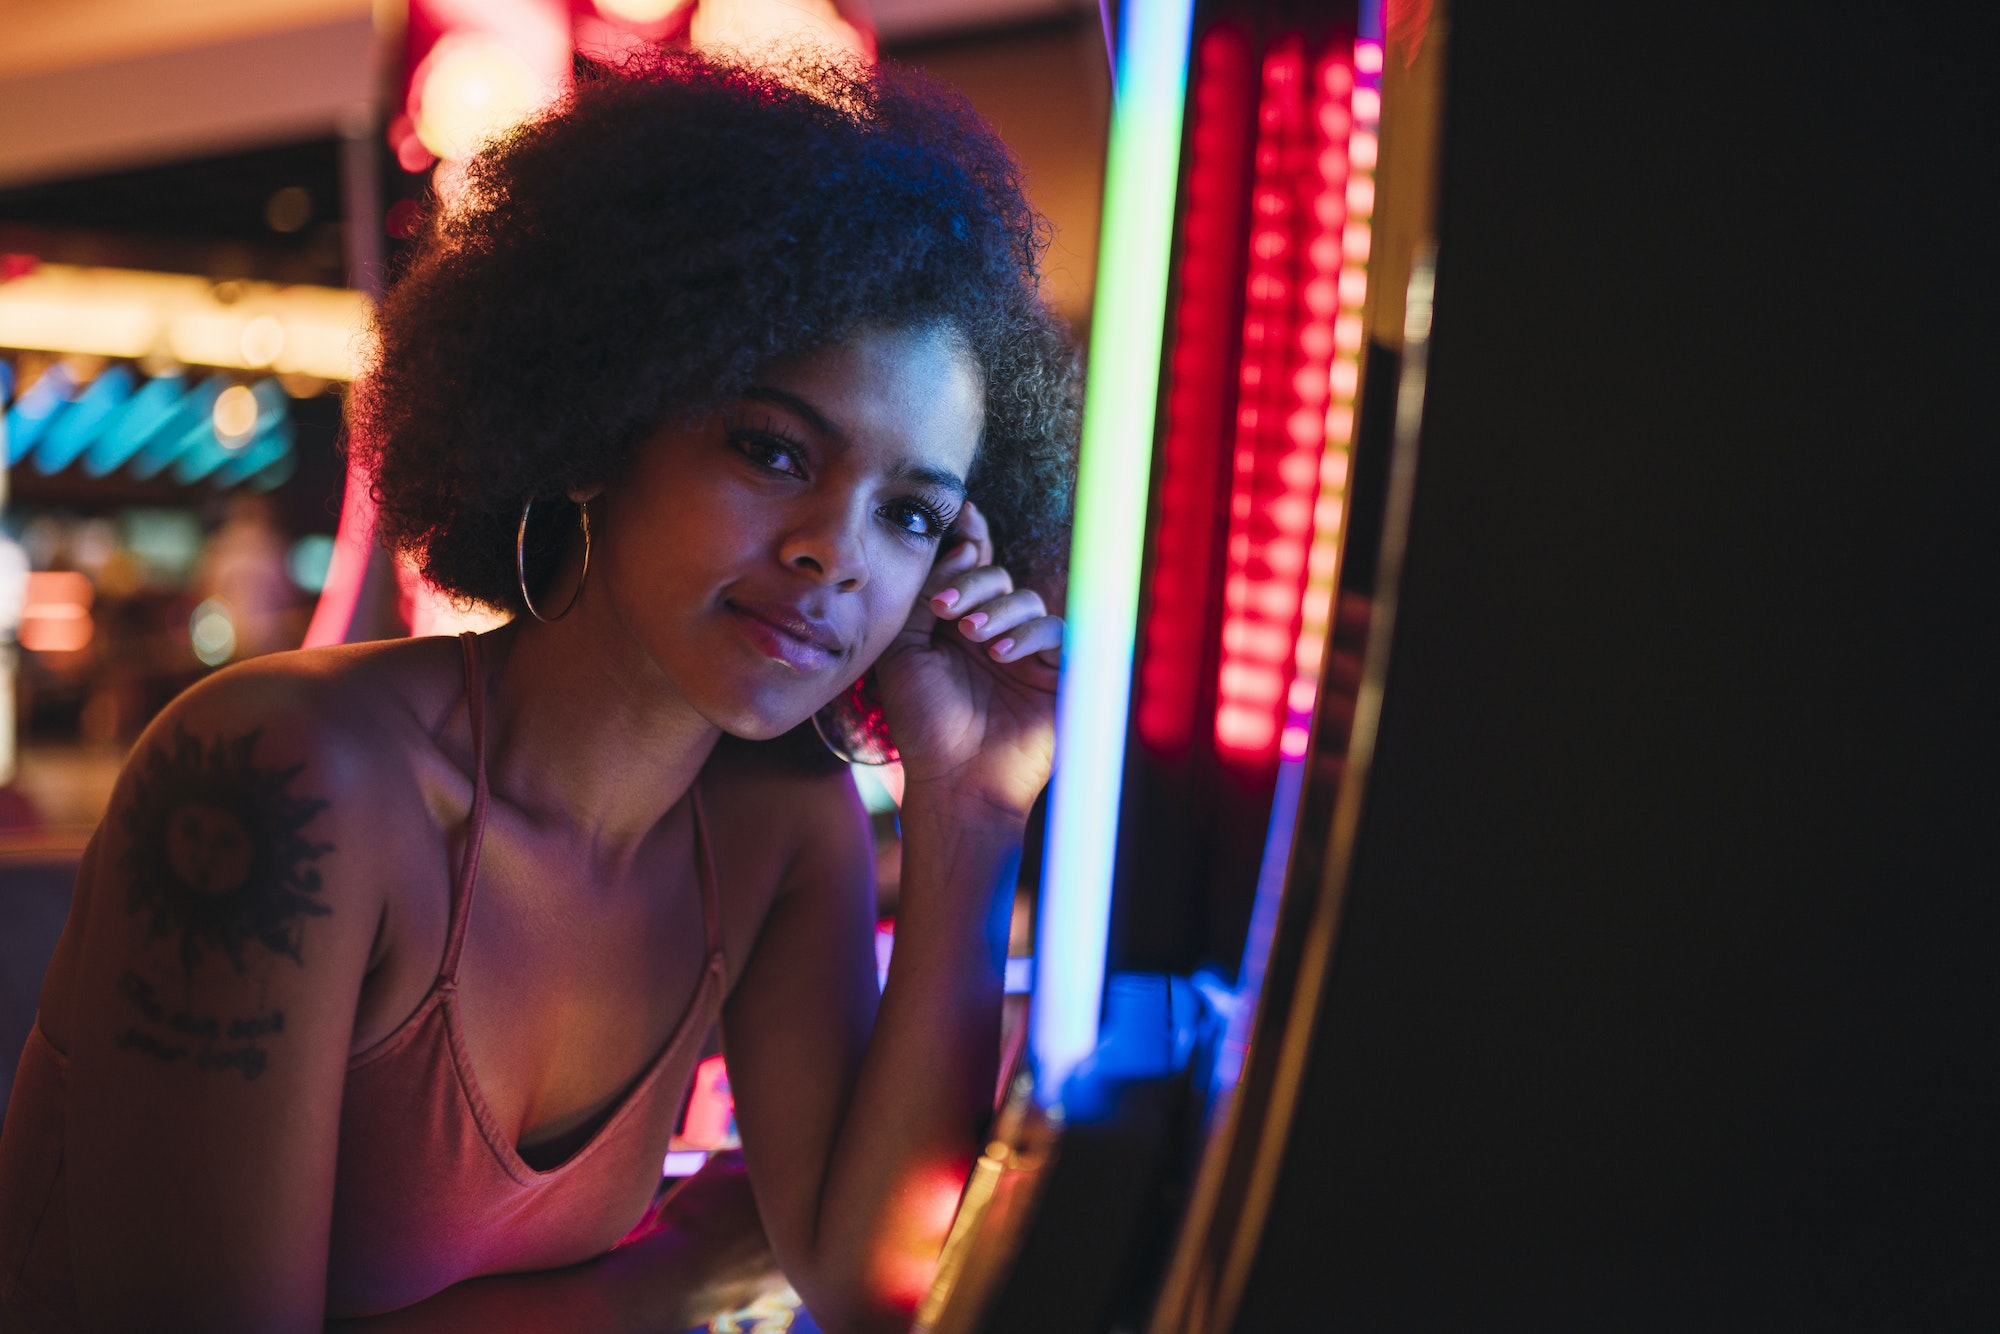 USA, Nevada, Las Vegas, portrait of young woman at slot machine in a casino